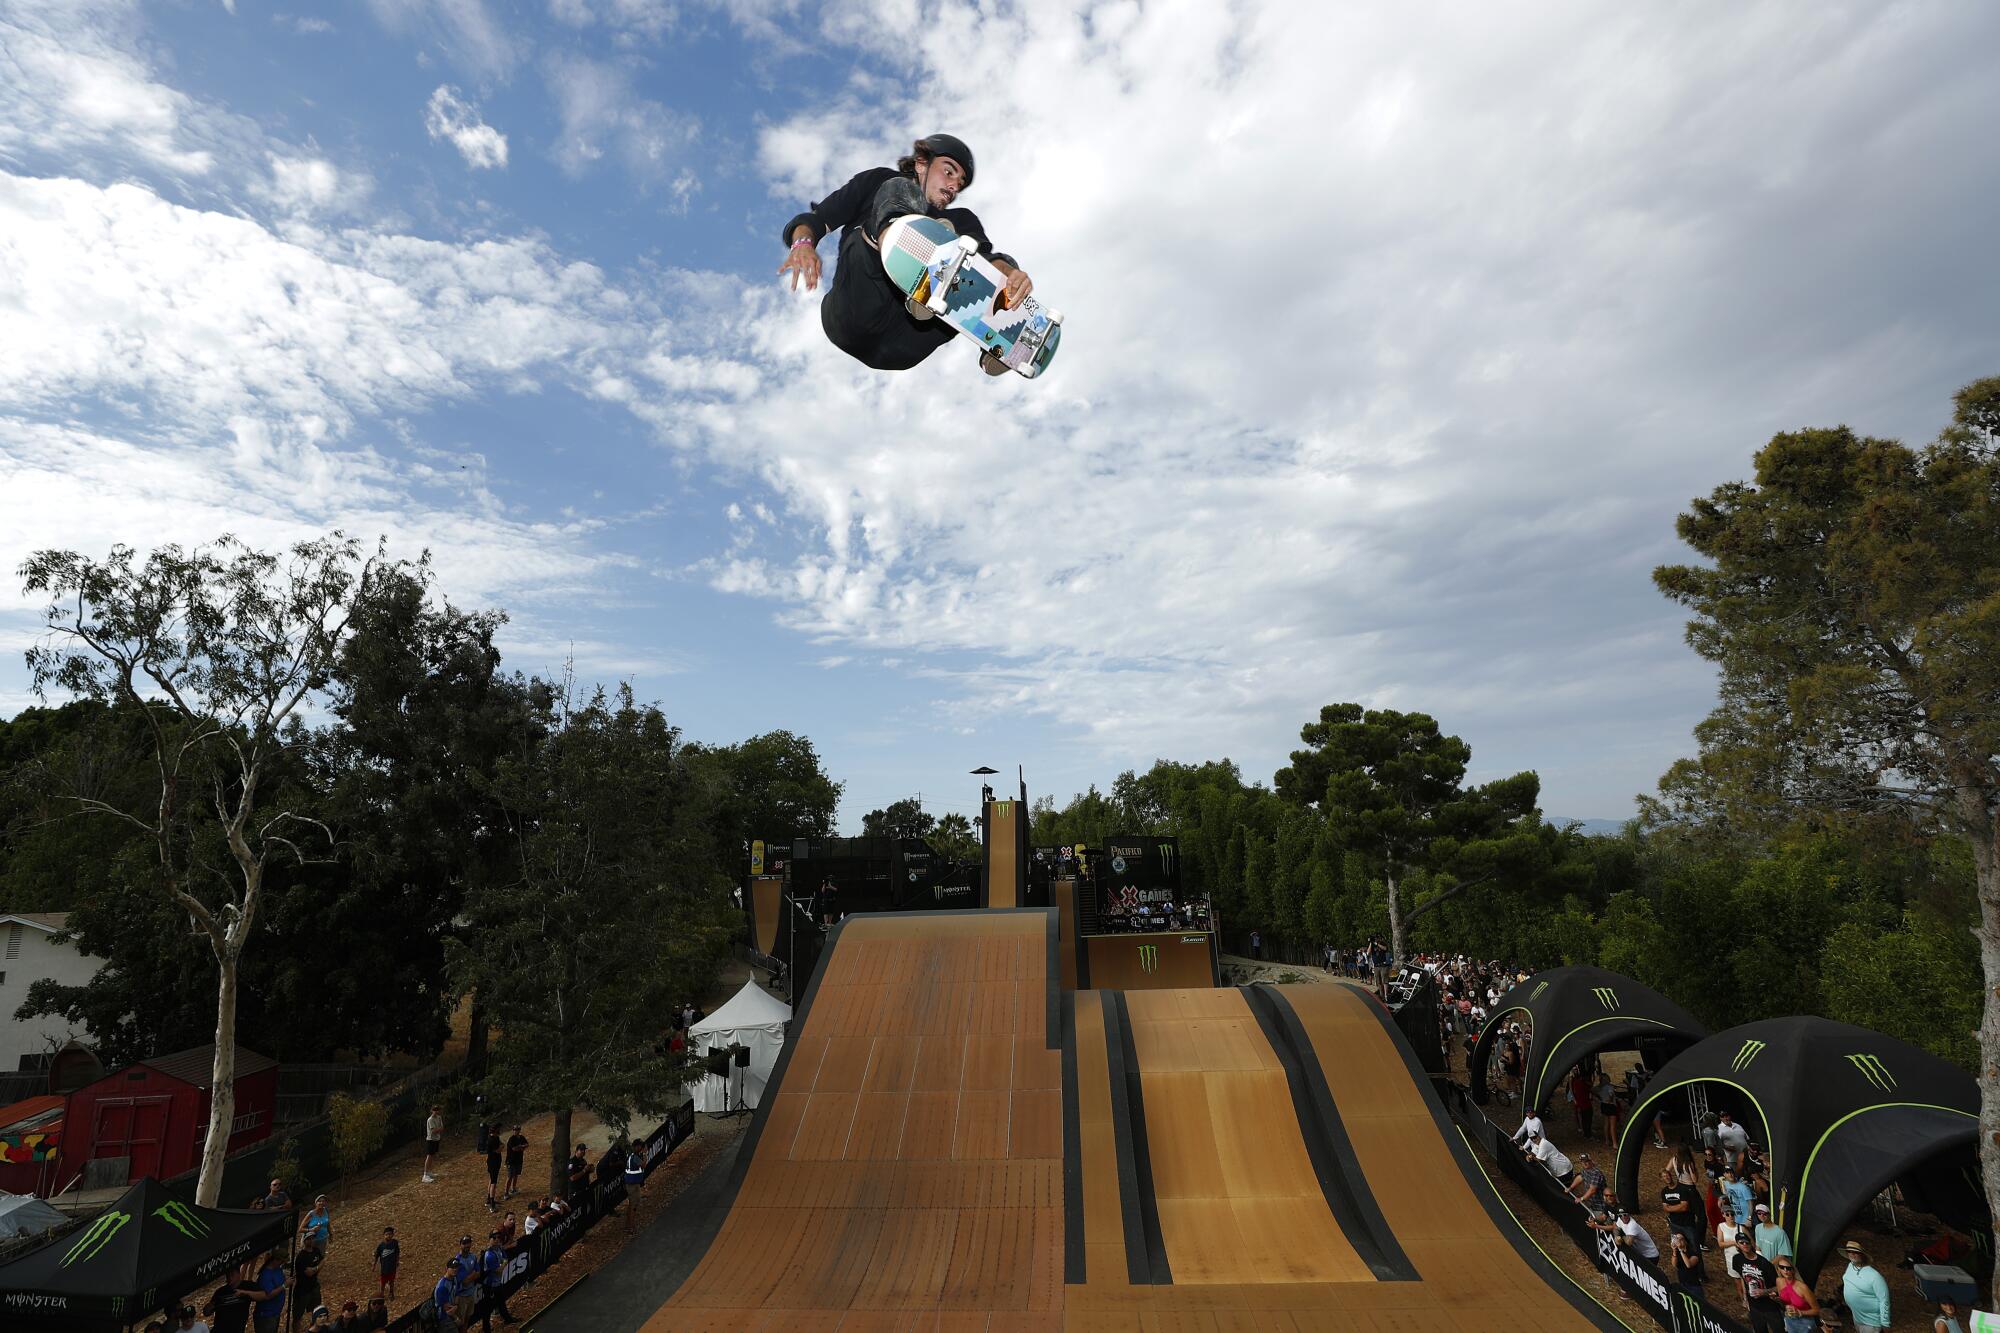 Edouard Damestoy of France won the skateboard megapark competition in the X Games in Vista, Calif., on Wednesday.